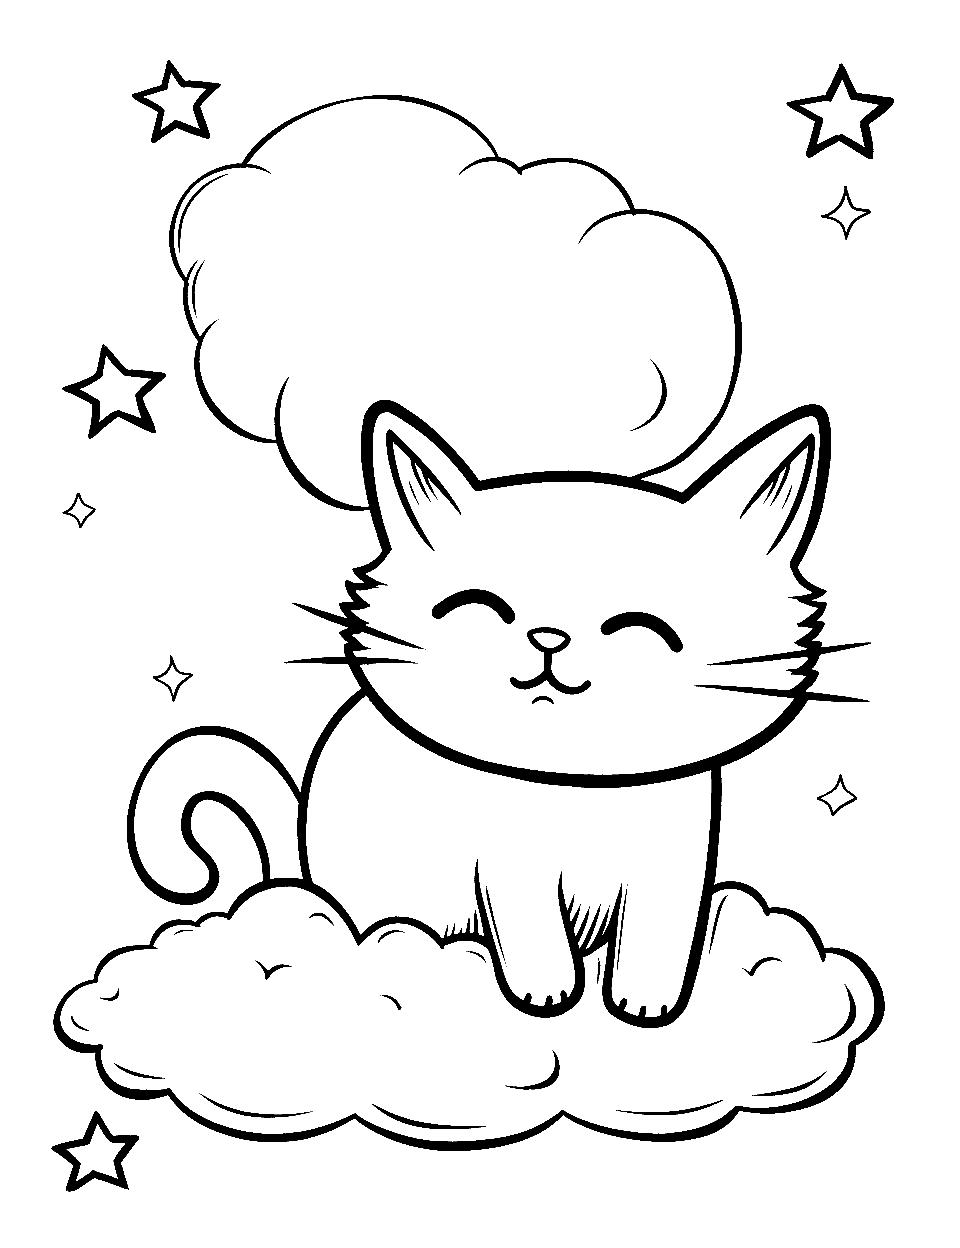 Kitten's Dreamy Nap Kitten Coloring Page - A kitten sleeping on a cloud, with stars twinkling around.